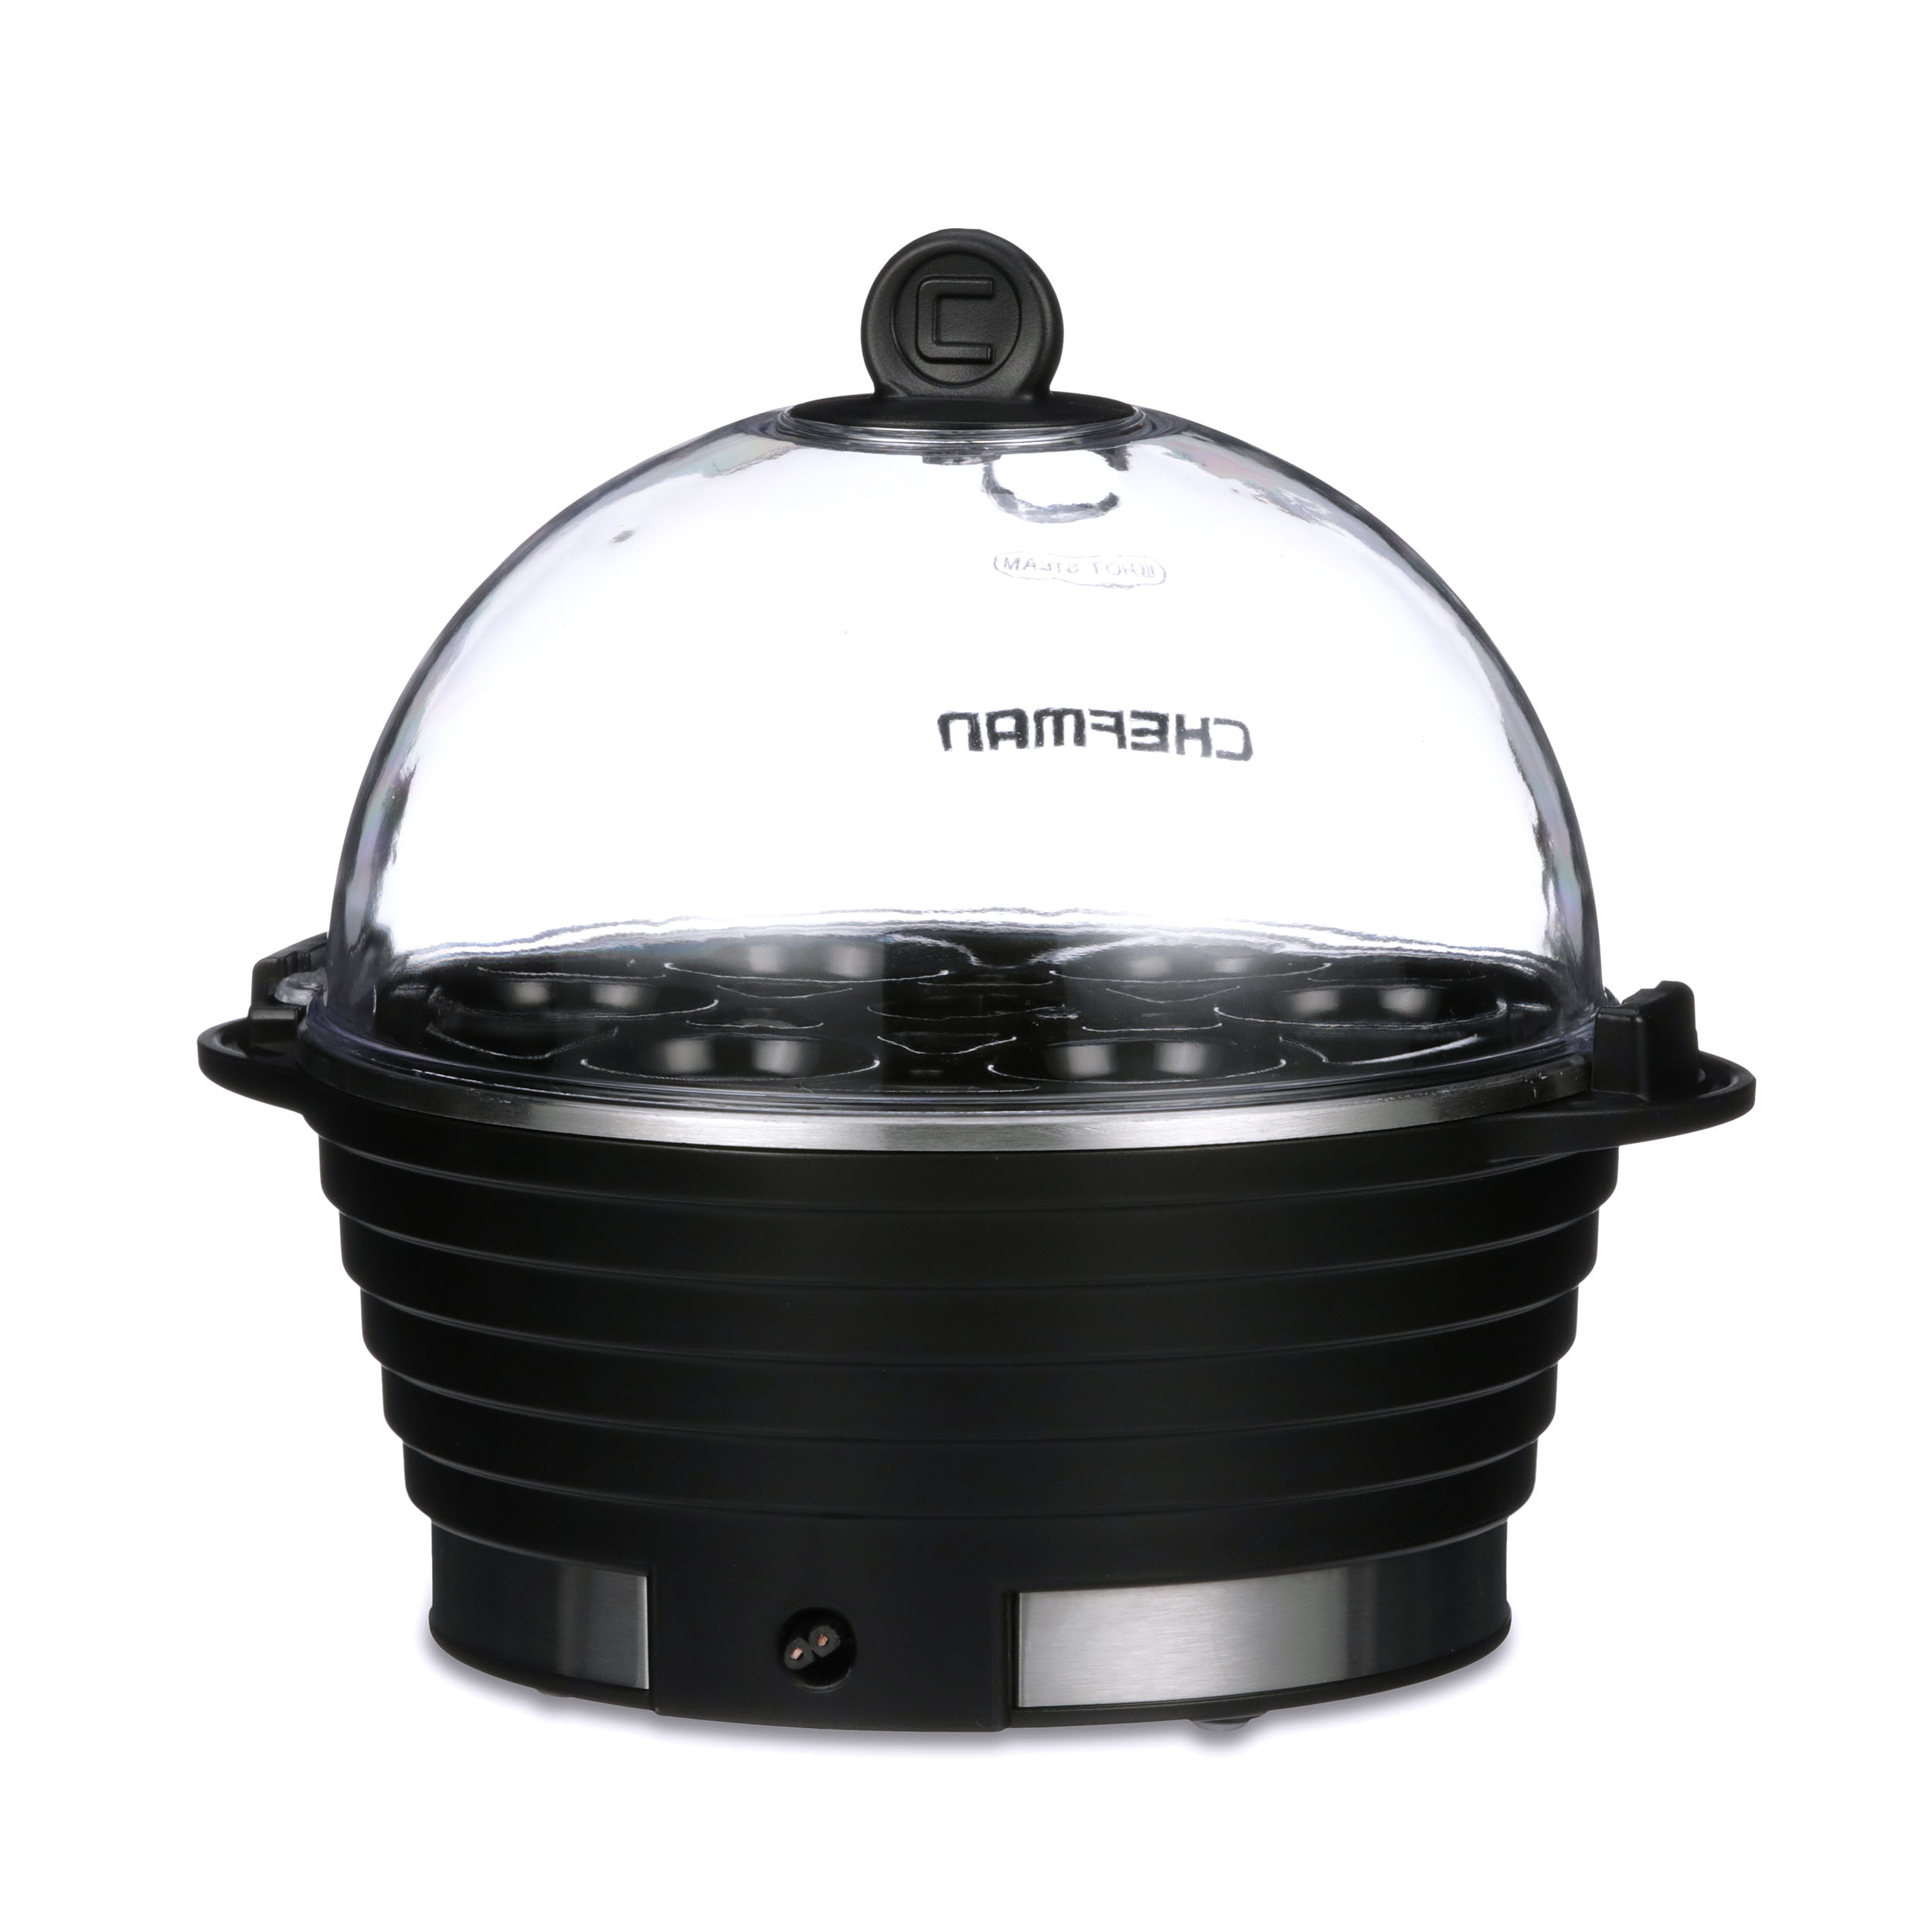 Chefman Product Feature - Electric Egg Cooker 